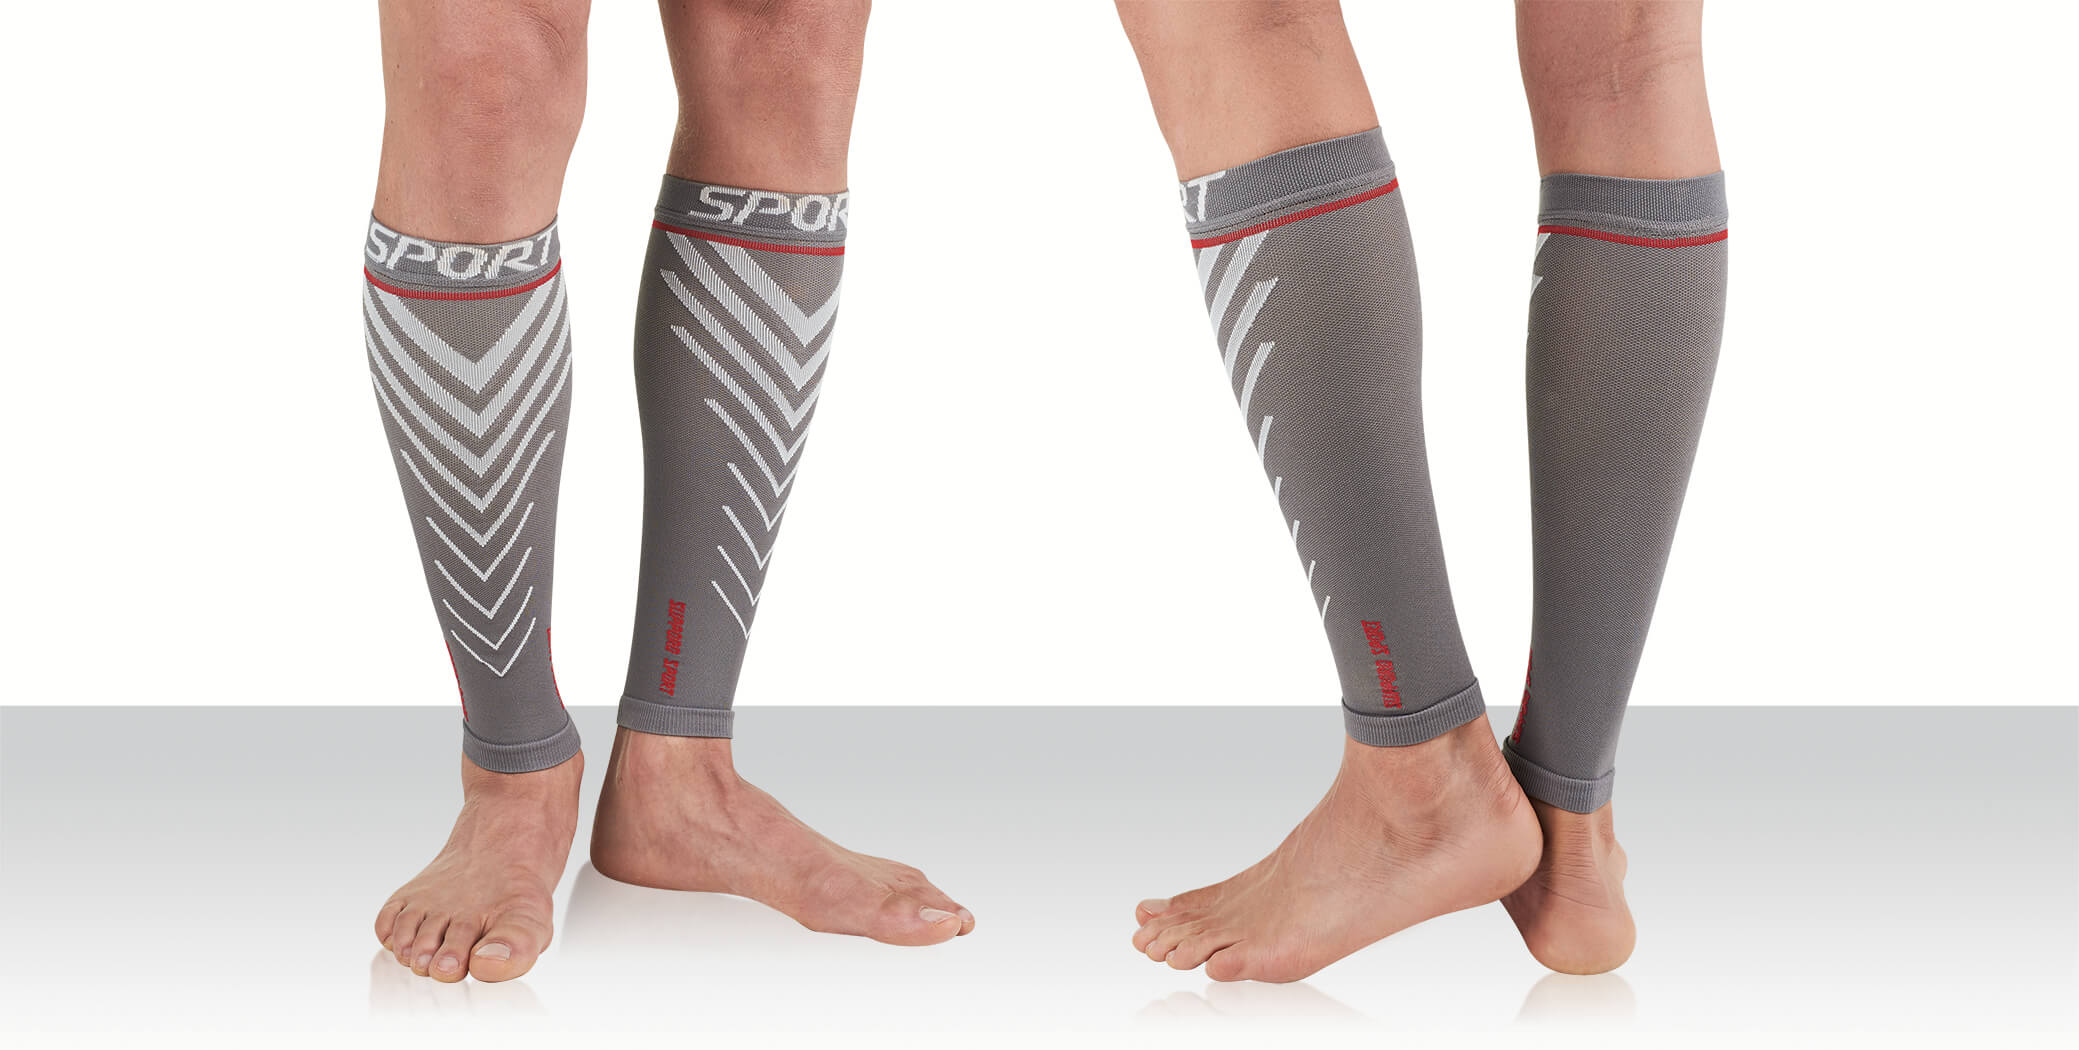 Unisex Sports Compression calf sleeves - Supporo